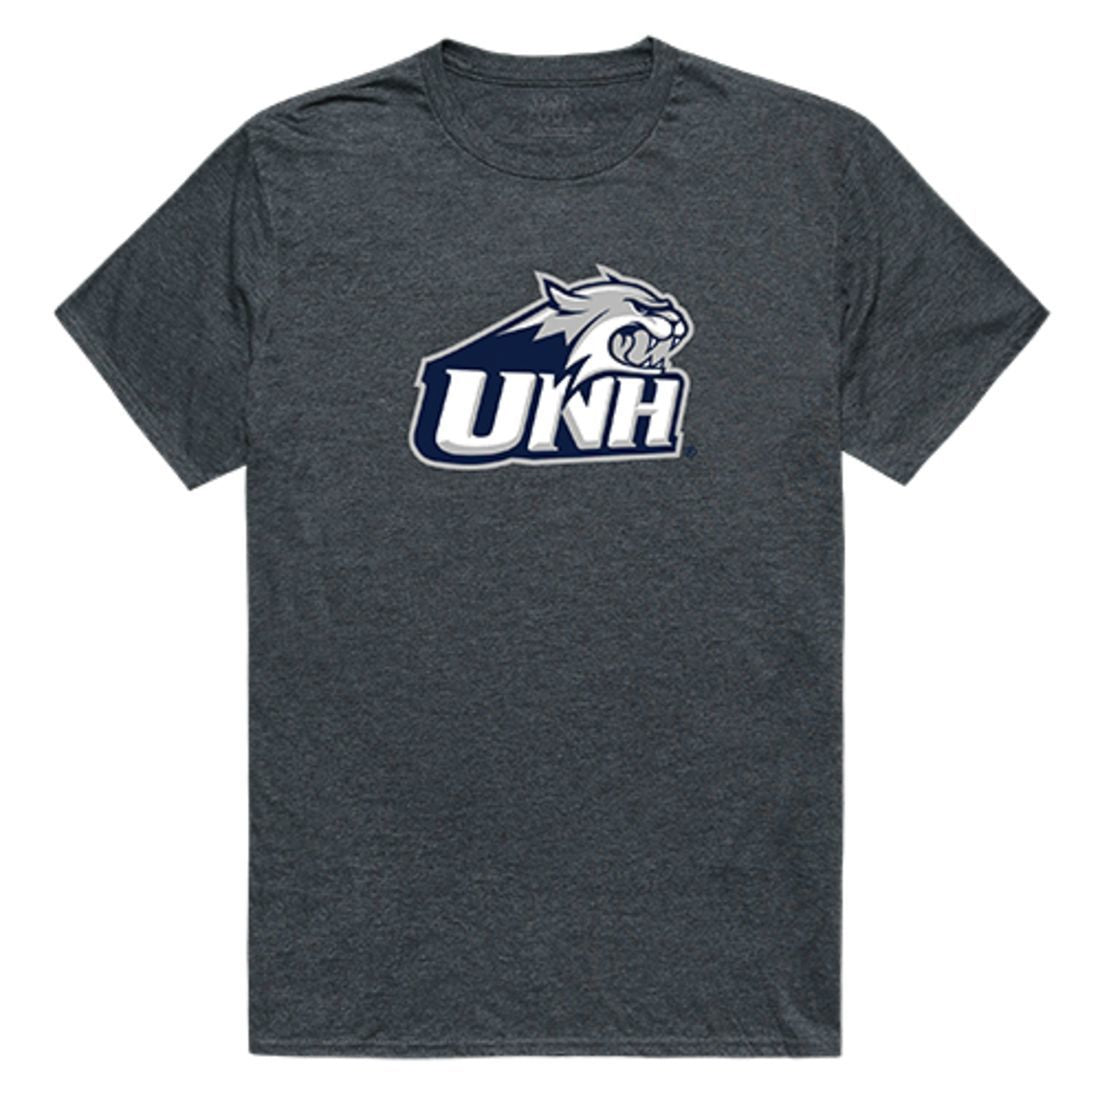 UNH University of New Hampshire Wildcats Cinder T-Shirt Heather Charcoal-Campus-Wardrobe